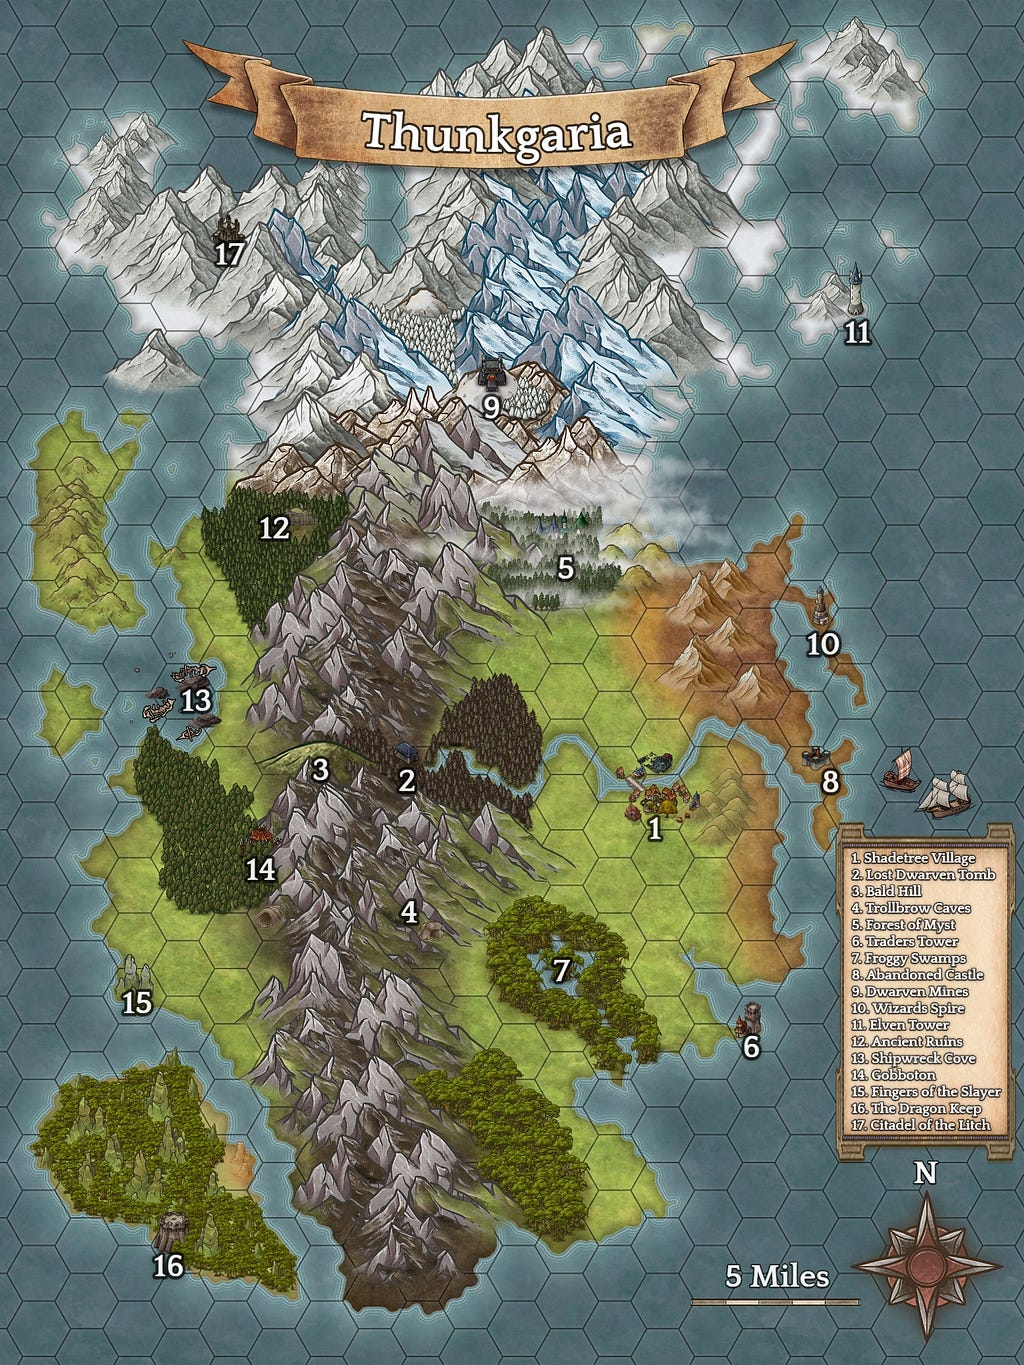 A fantasy map of an island with a large mountain range, forests, and a number of key locations marked.